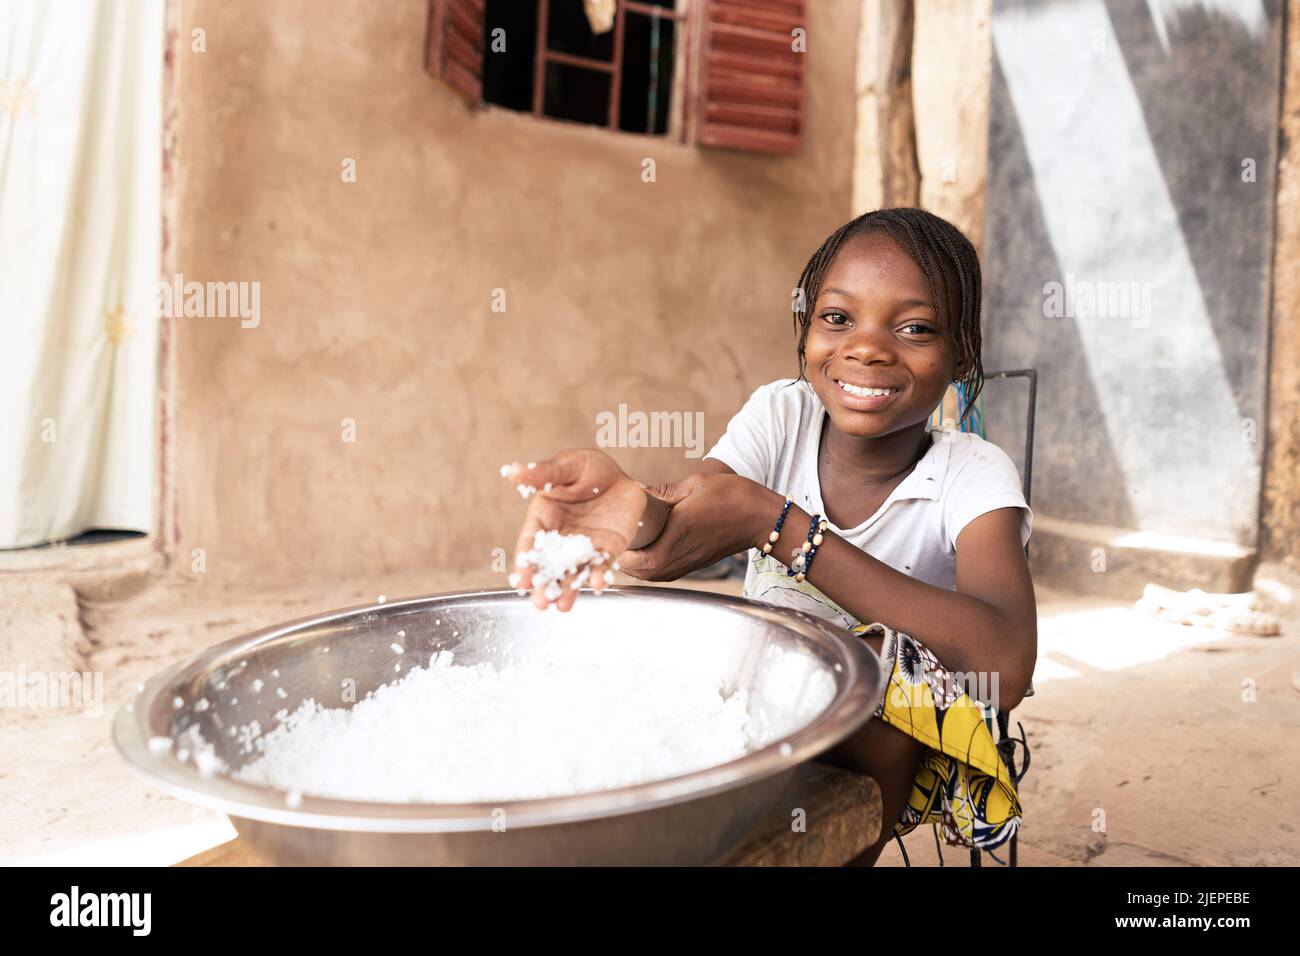 Radiant little African girl in front of a giant plate enjoying her simple lunch made of boiled white rice Stock Photo